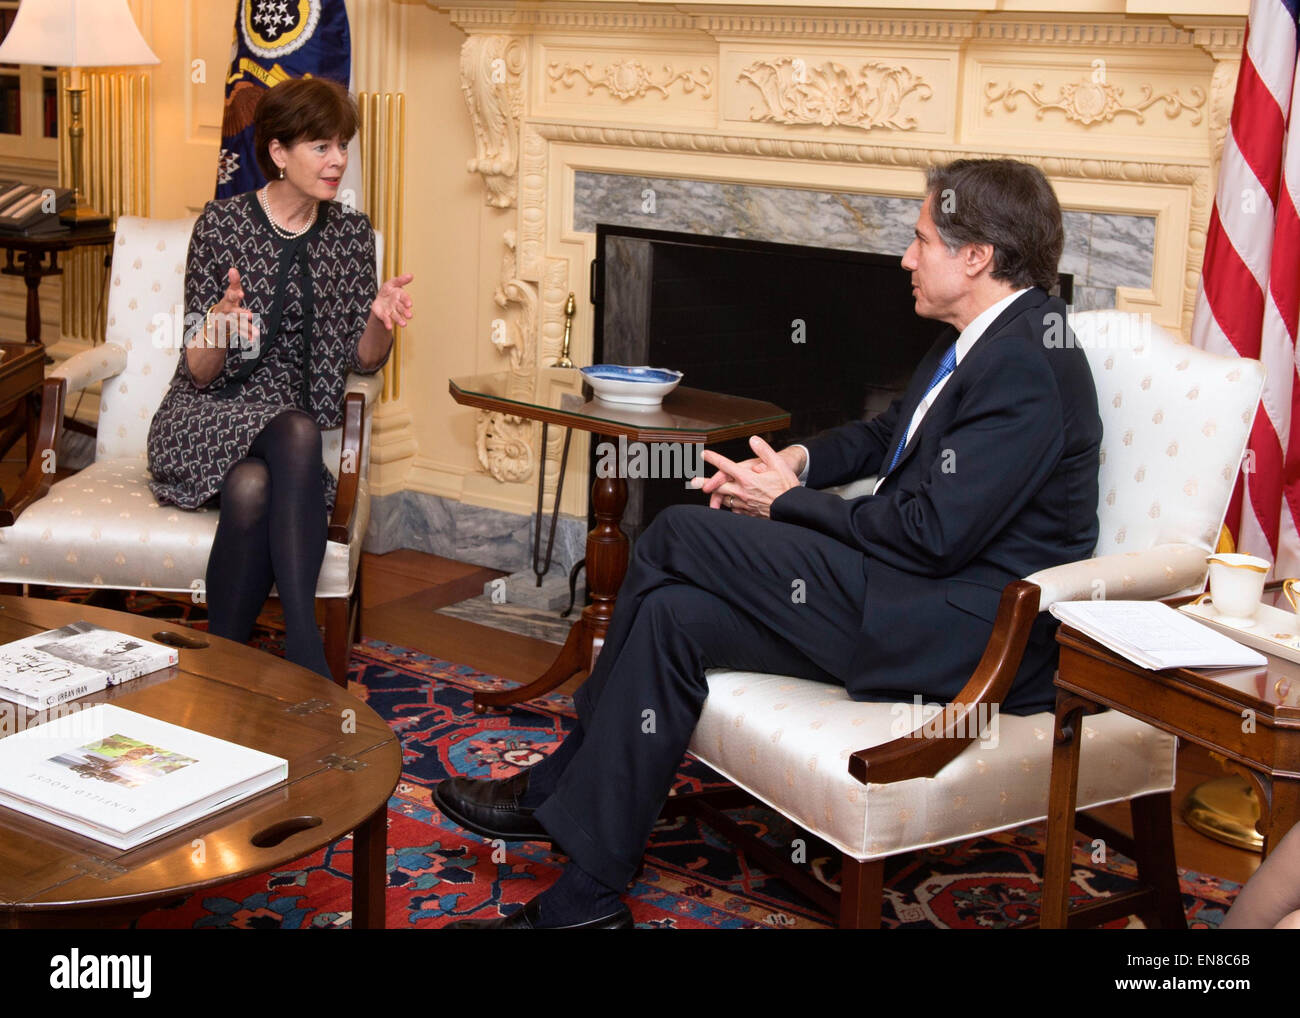 Deputy Secretary of State Tony Blinken meets with Dutch Ministry of Foreign Affairs Secretary General Renee Jones-Bos at the U.S. Department of State in Washington, D.C., on March 11, 2015. Stock Photo